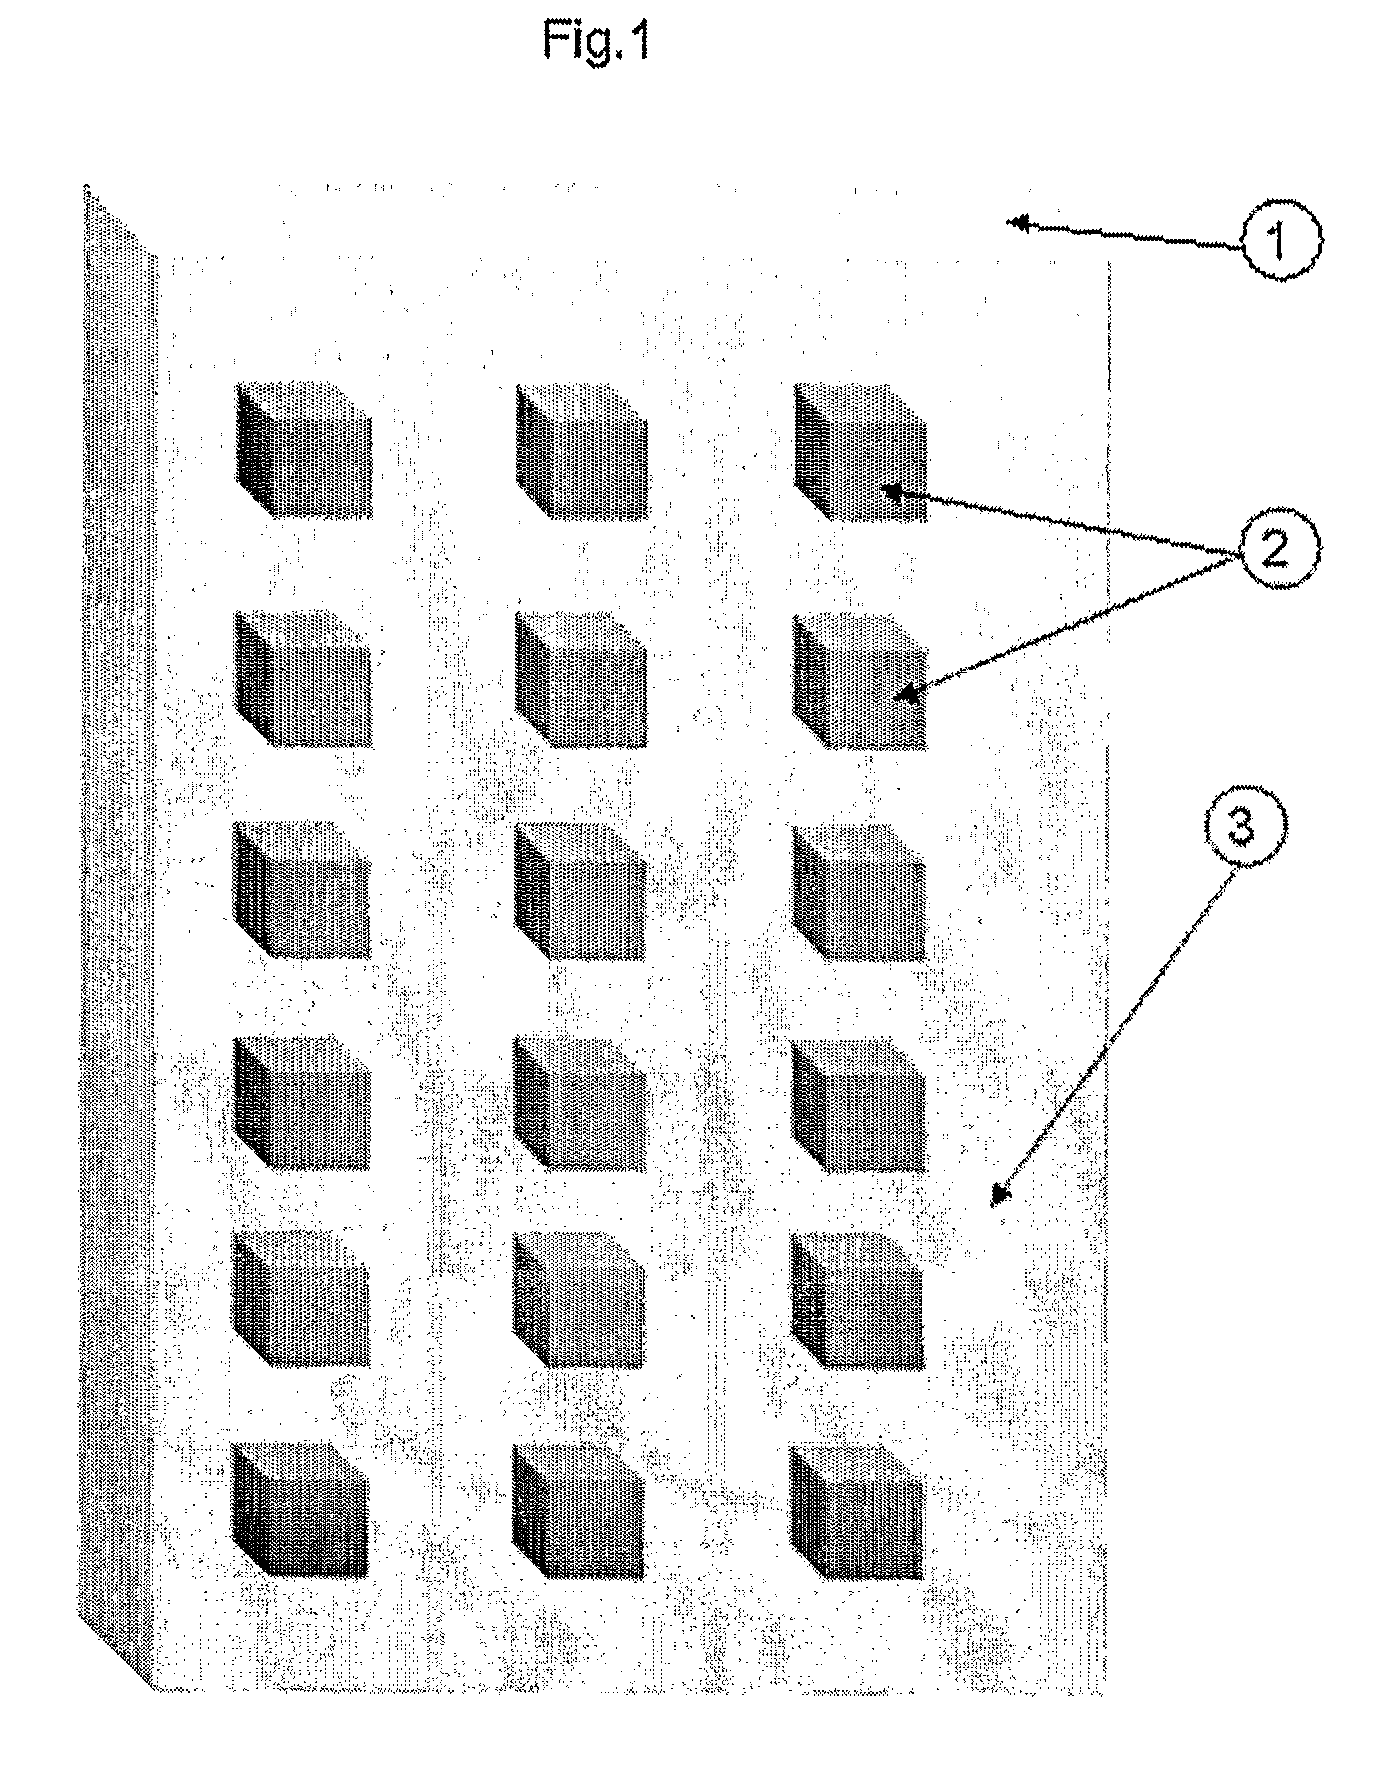 Antistatic Coating For Surfaces Made Of Metal Materials And Dielectric Materials Or Of Dielectric Materials Only In Particular Antenna Surfaces And Method Of Application Thereof